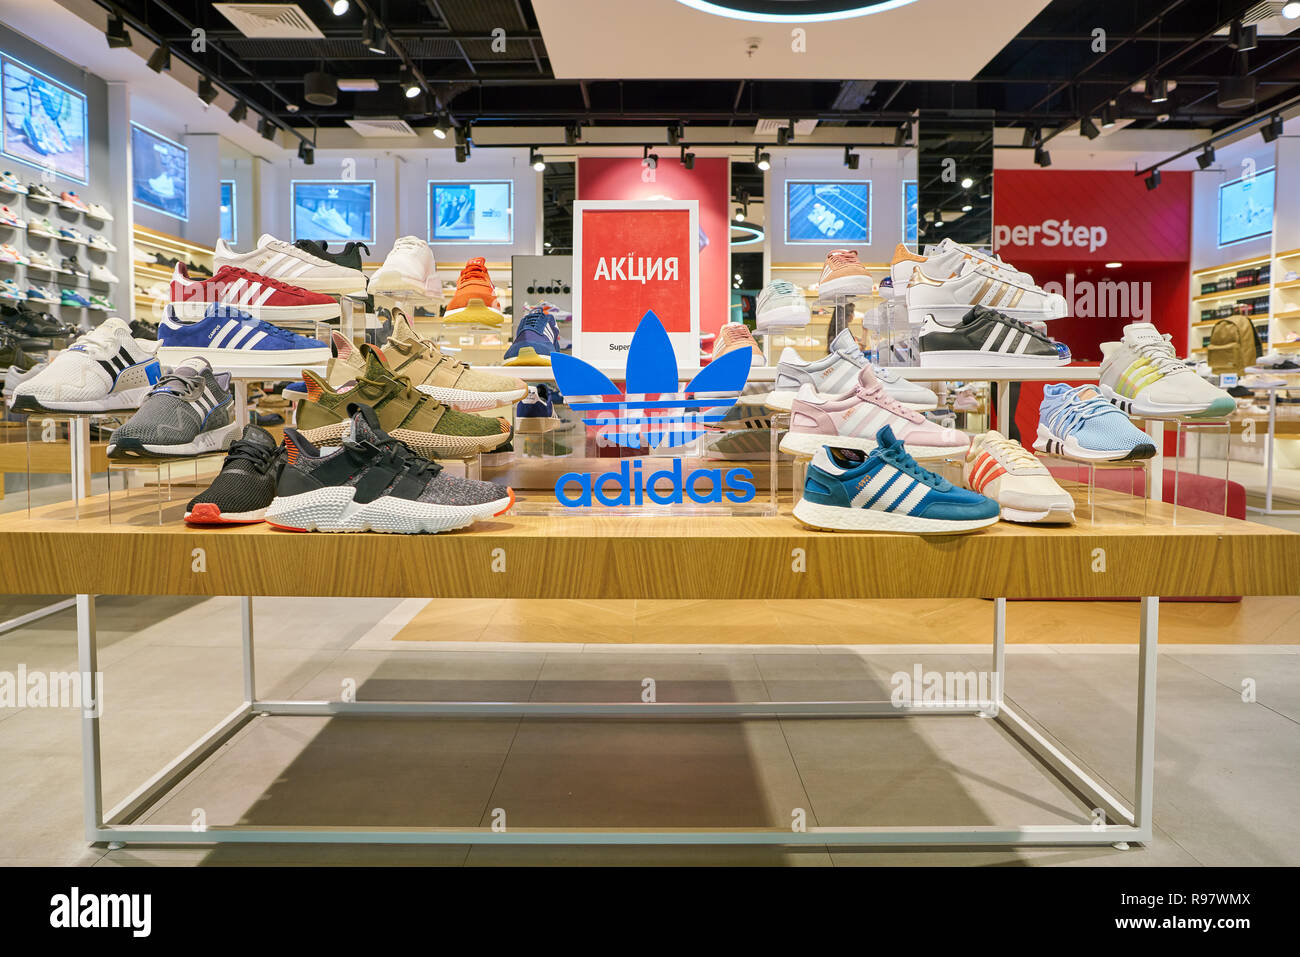 SAINT RUSSIA - MAY, 2018: Adidas athletic shoes on display SuperStep store in Galeria shopping center Photo - Alamy